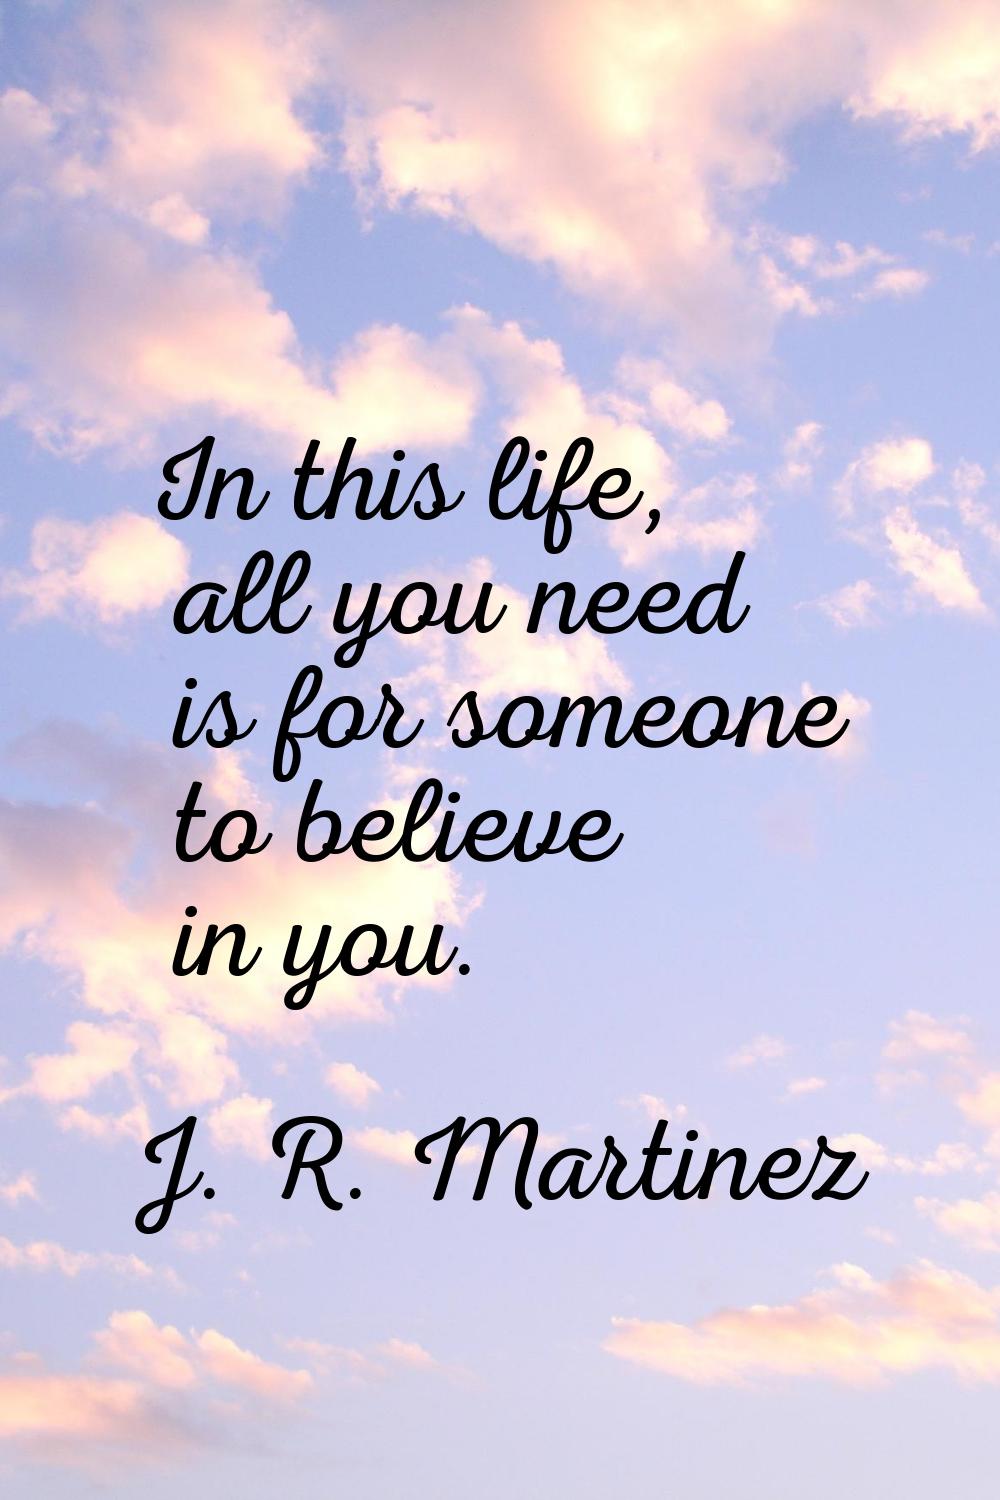 In this life, all you need is for someone to believe in you.